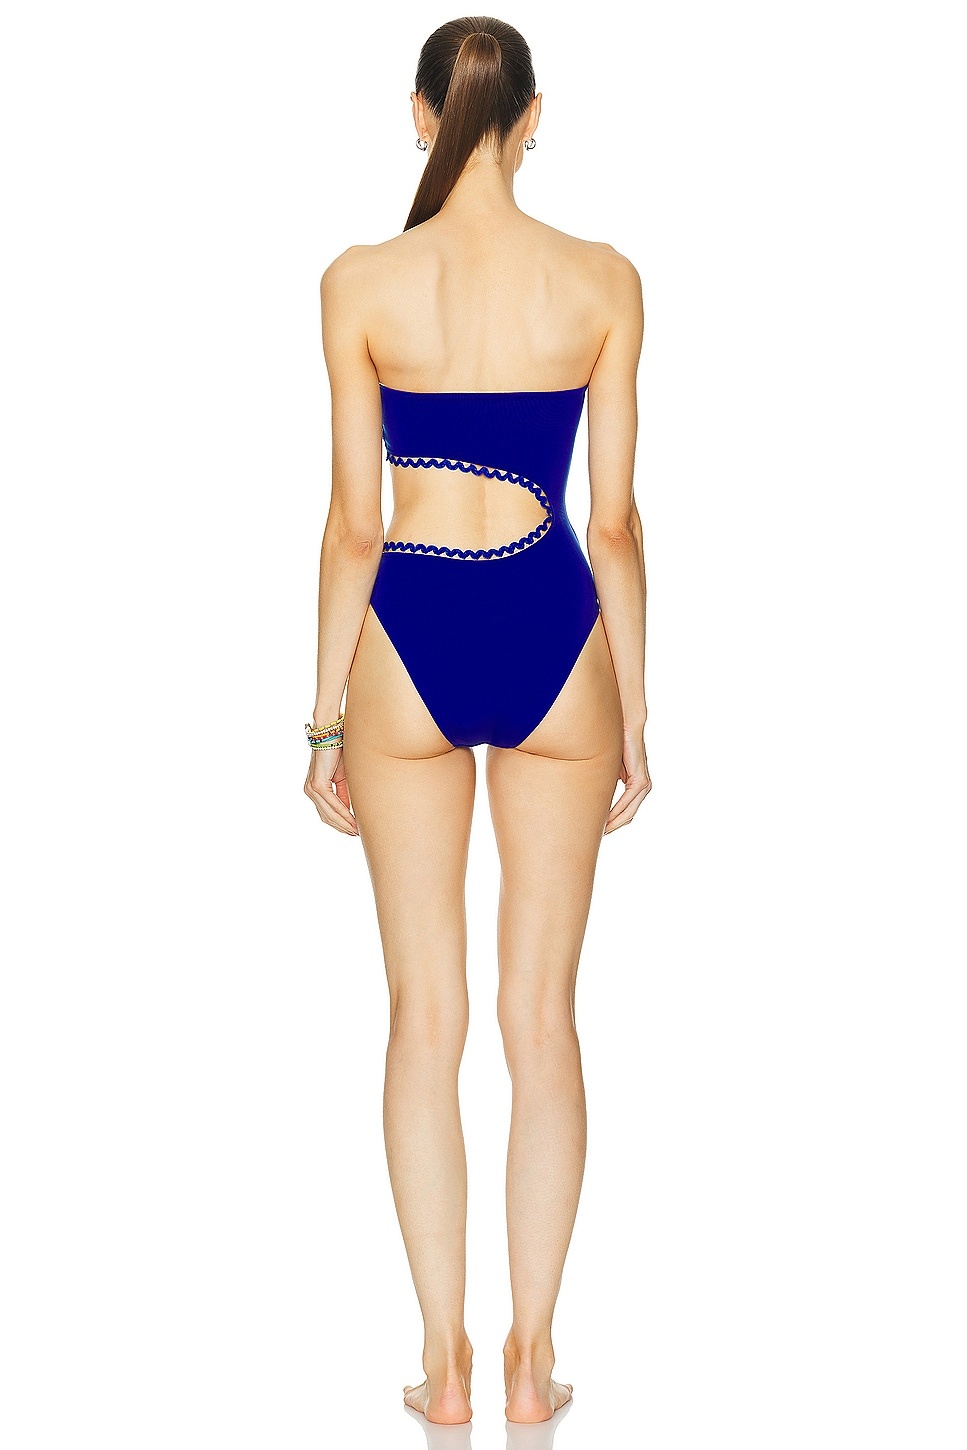 Fever Dancing One Piece Swimsuit - 4